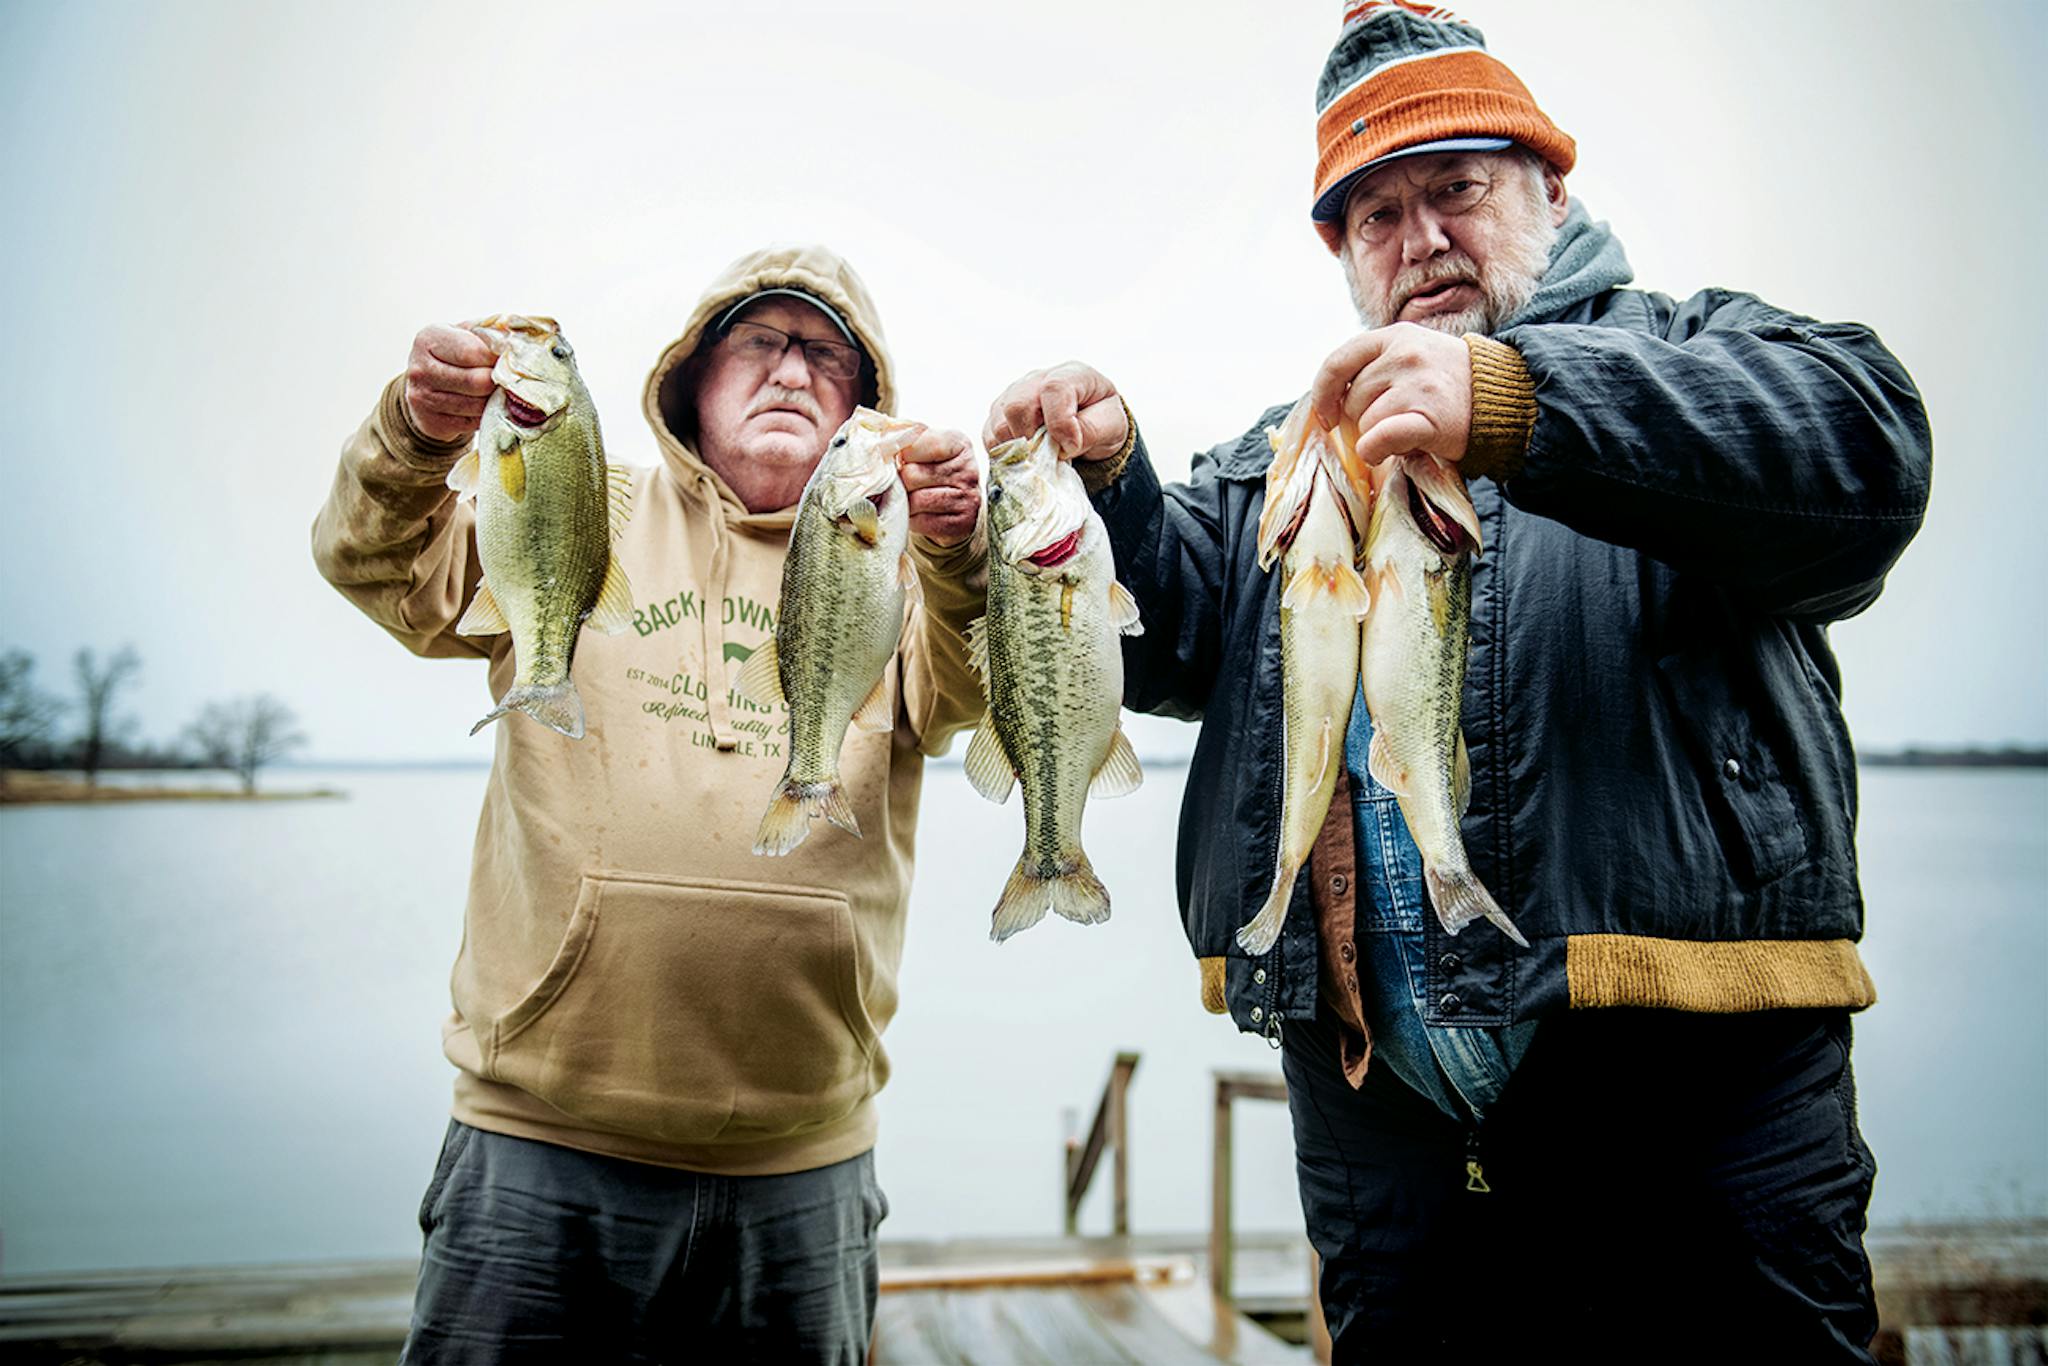 Glen Irwin, 71, of Quitman, and Louie Pope, 61, of Gilmer, hold up their catches of the day.